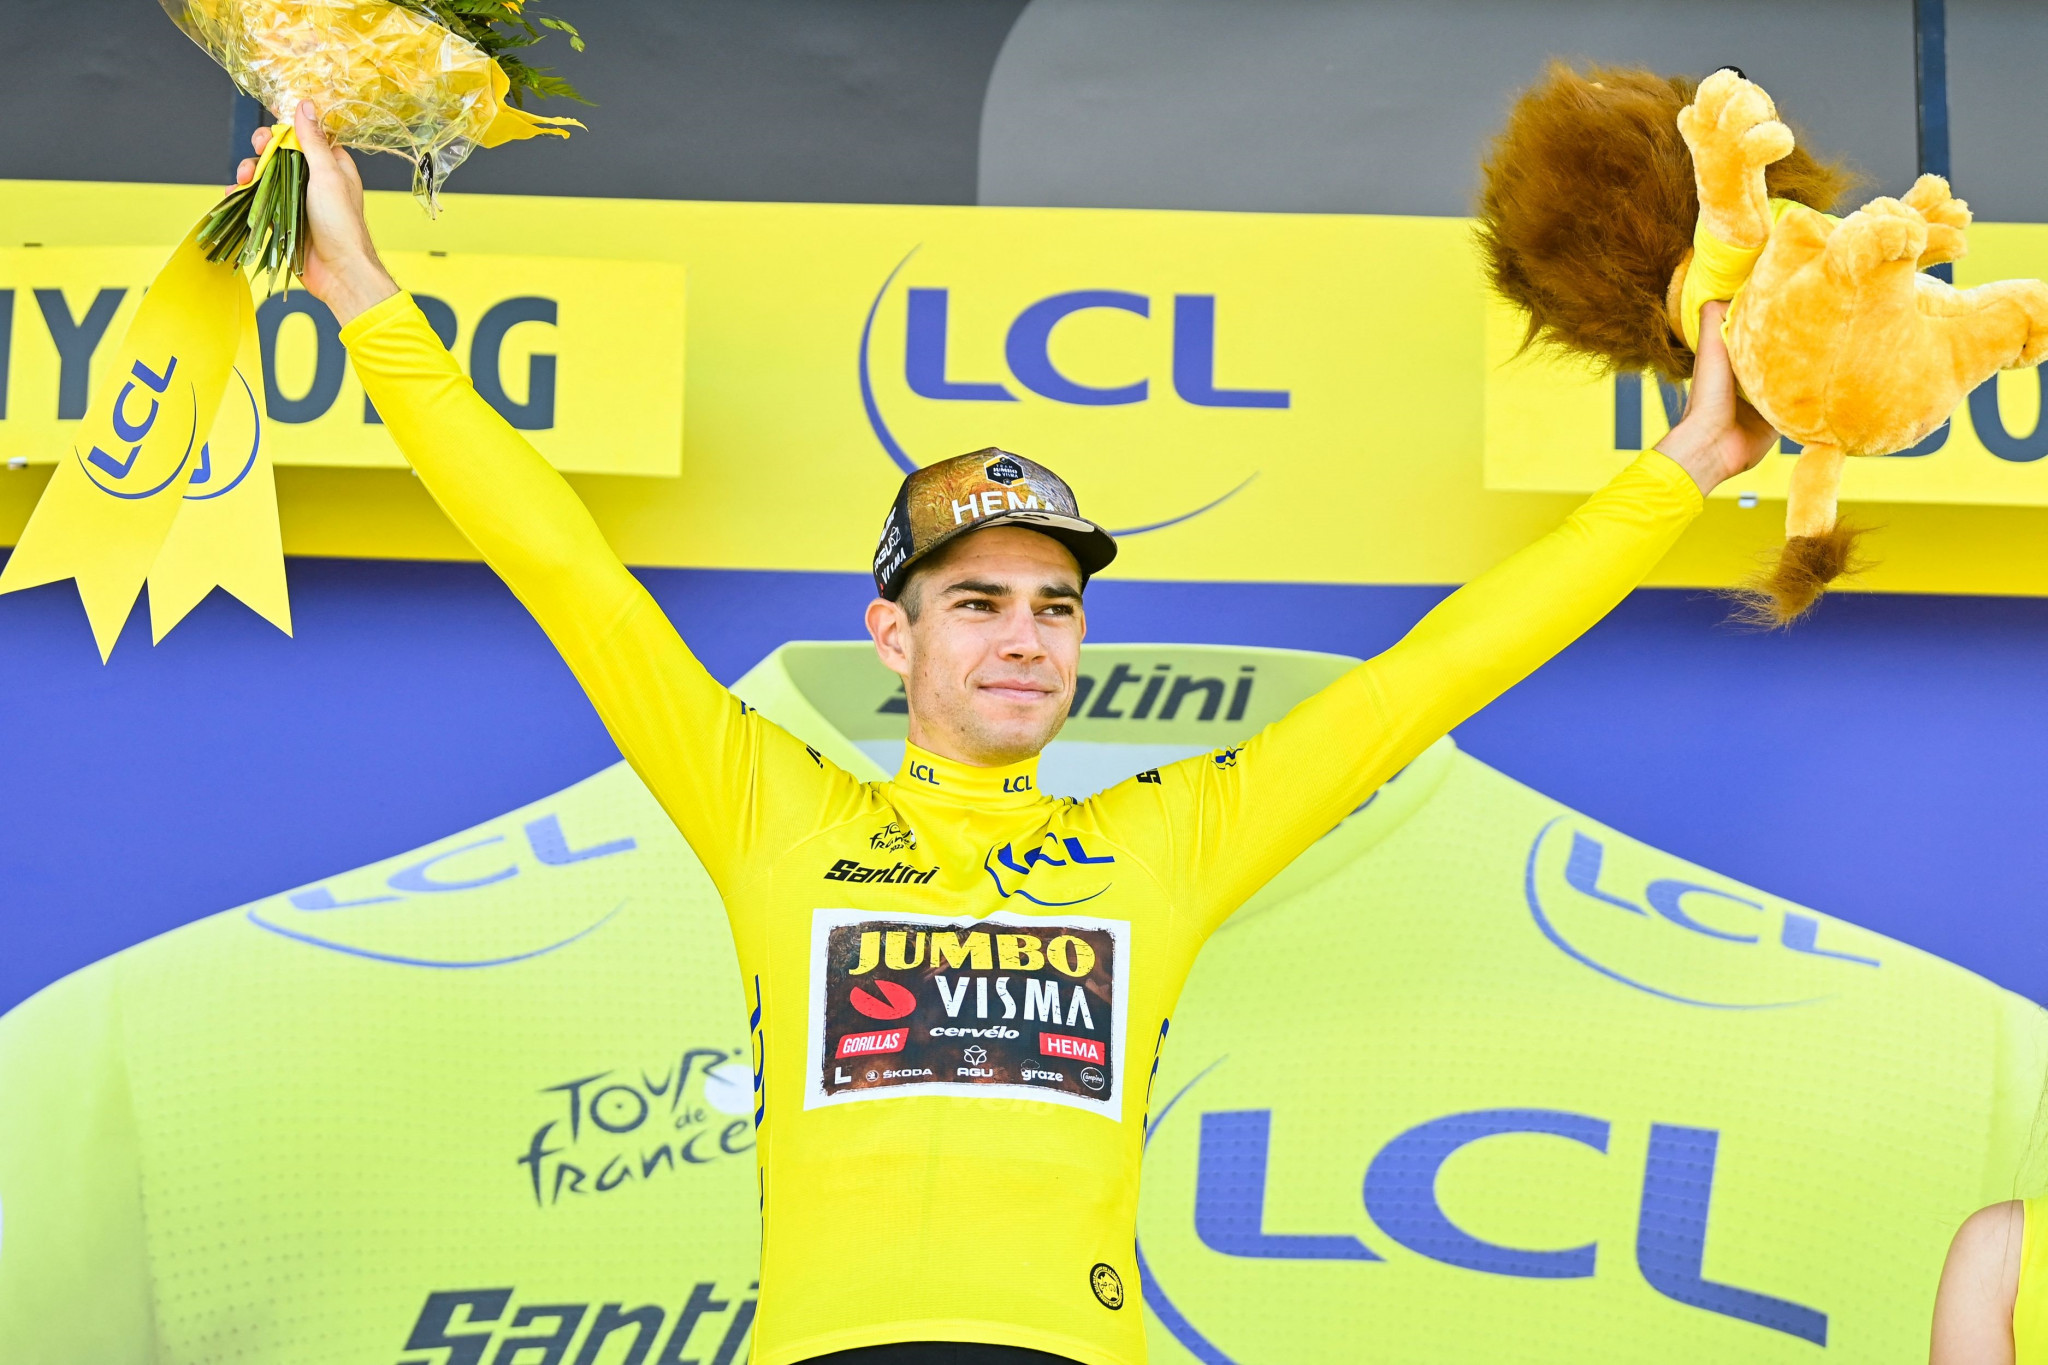 Belgium's Wout van Aert stands at the top of the podium with the yellow jersey ©Getty Images